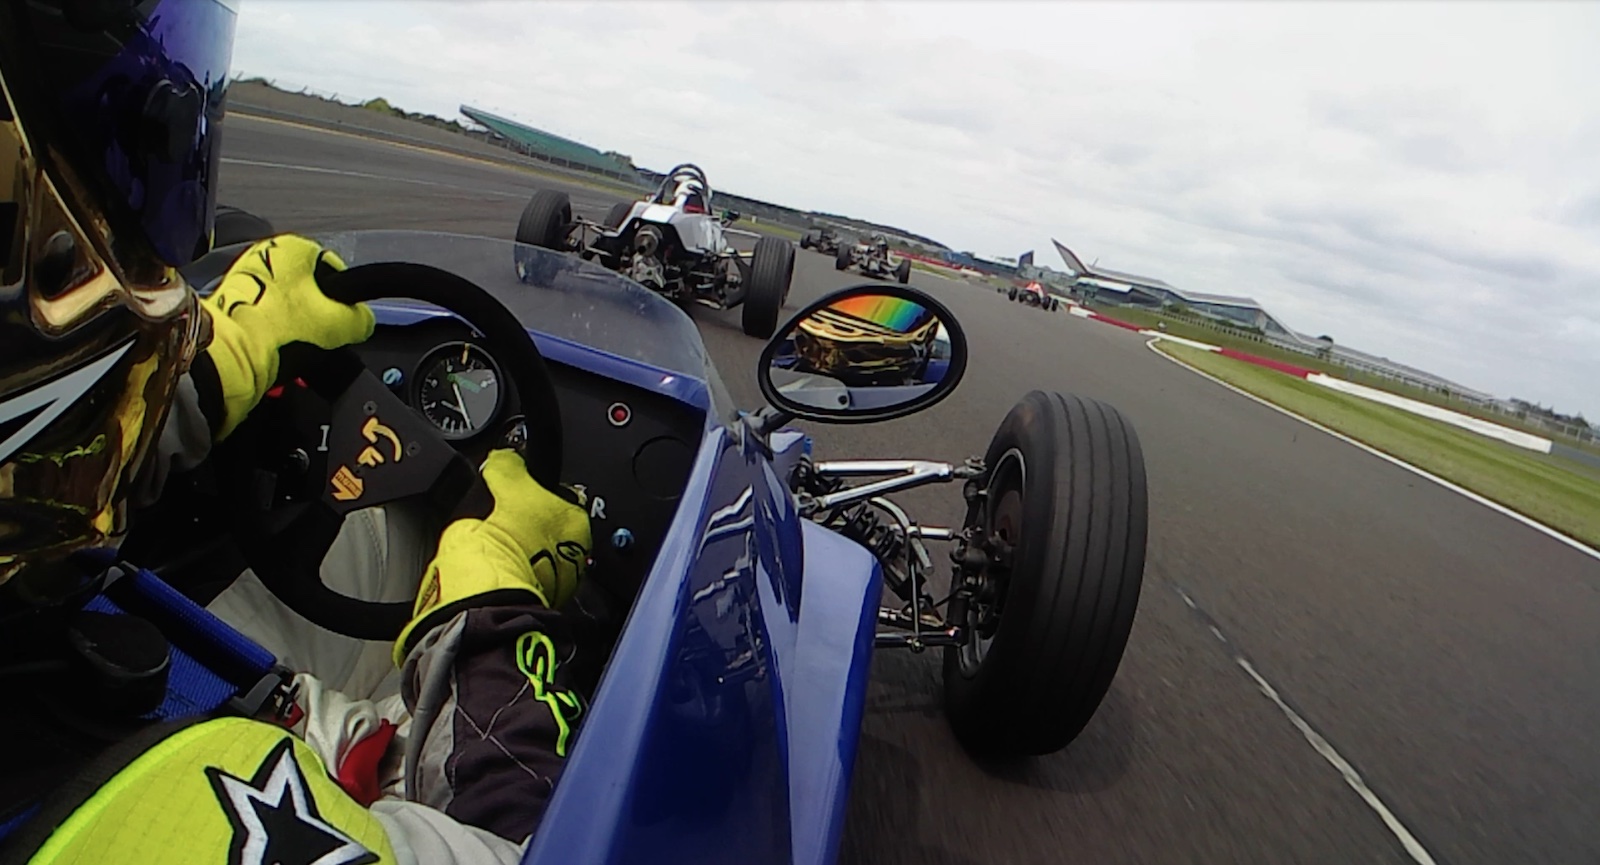 Onboard the Crossle at Silverstone GP circuit